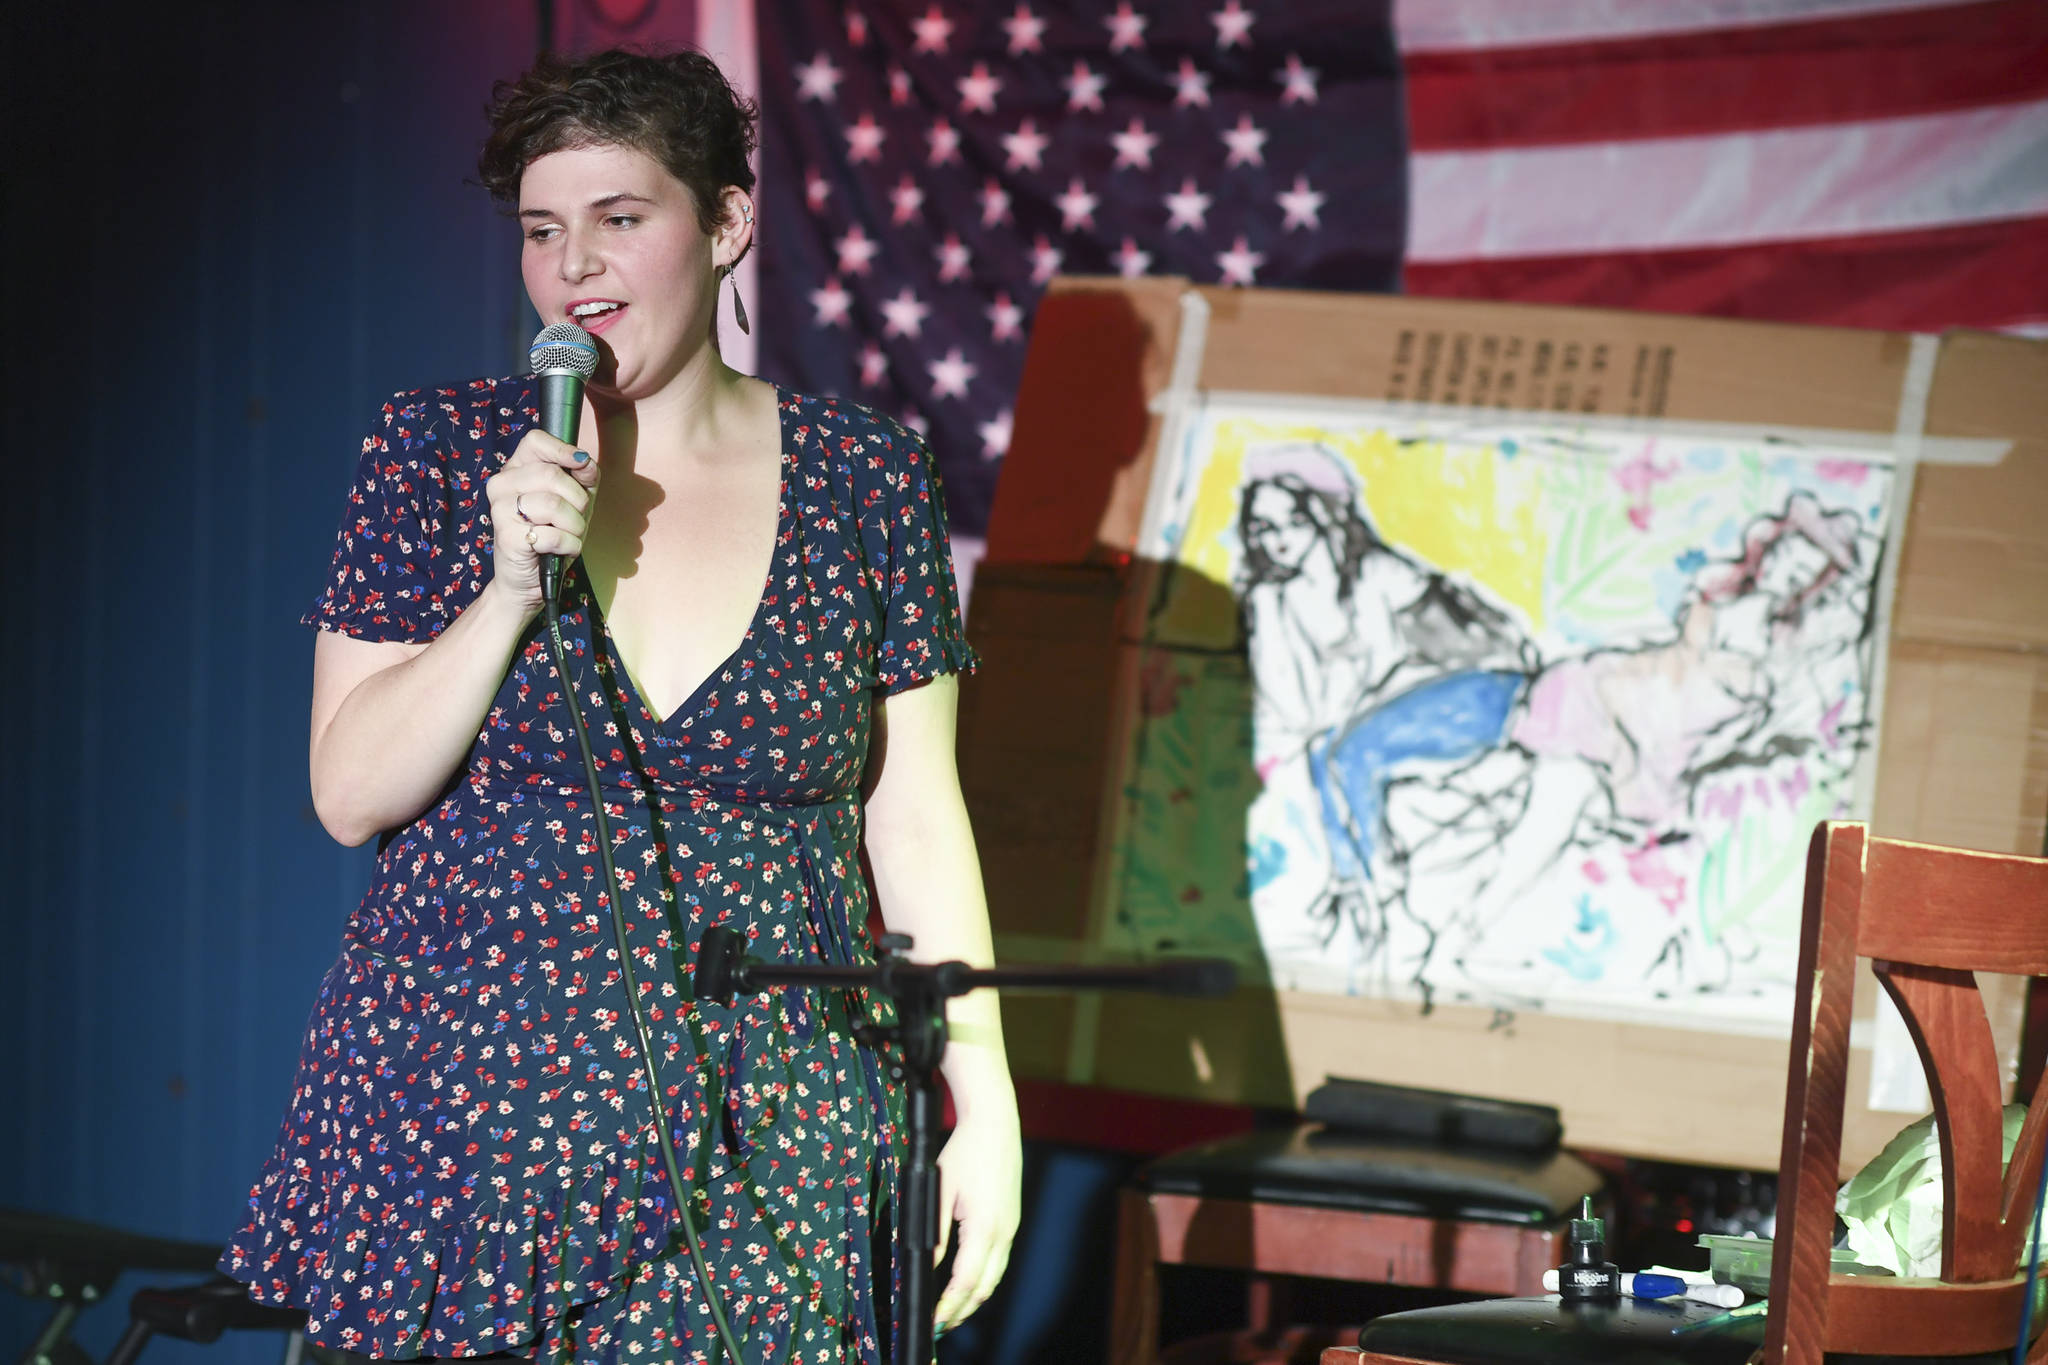 Natalie Weinberg performs with a live model painting of Dana Herndon and Serena Drazkowski during the GRLZ open mic night at the The Rendezvous Bar on Wednesday, Aug. 14, 2019. (Michael Penn | Juneau Empire)